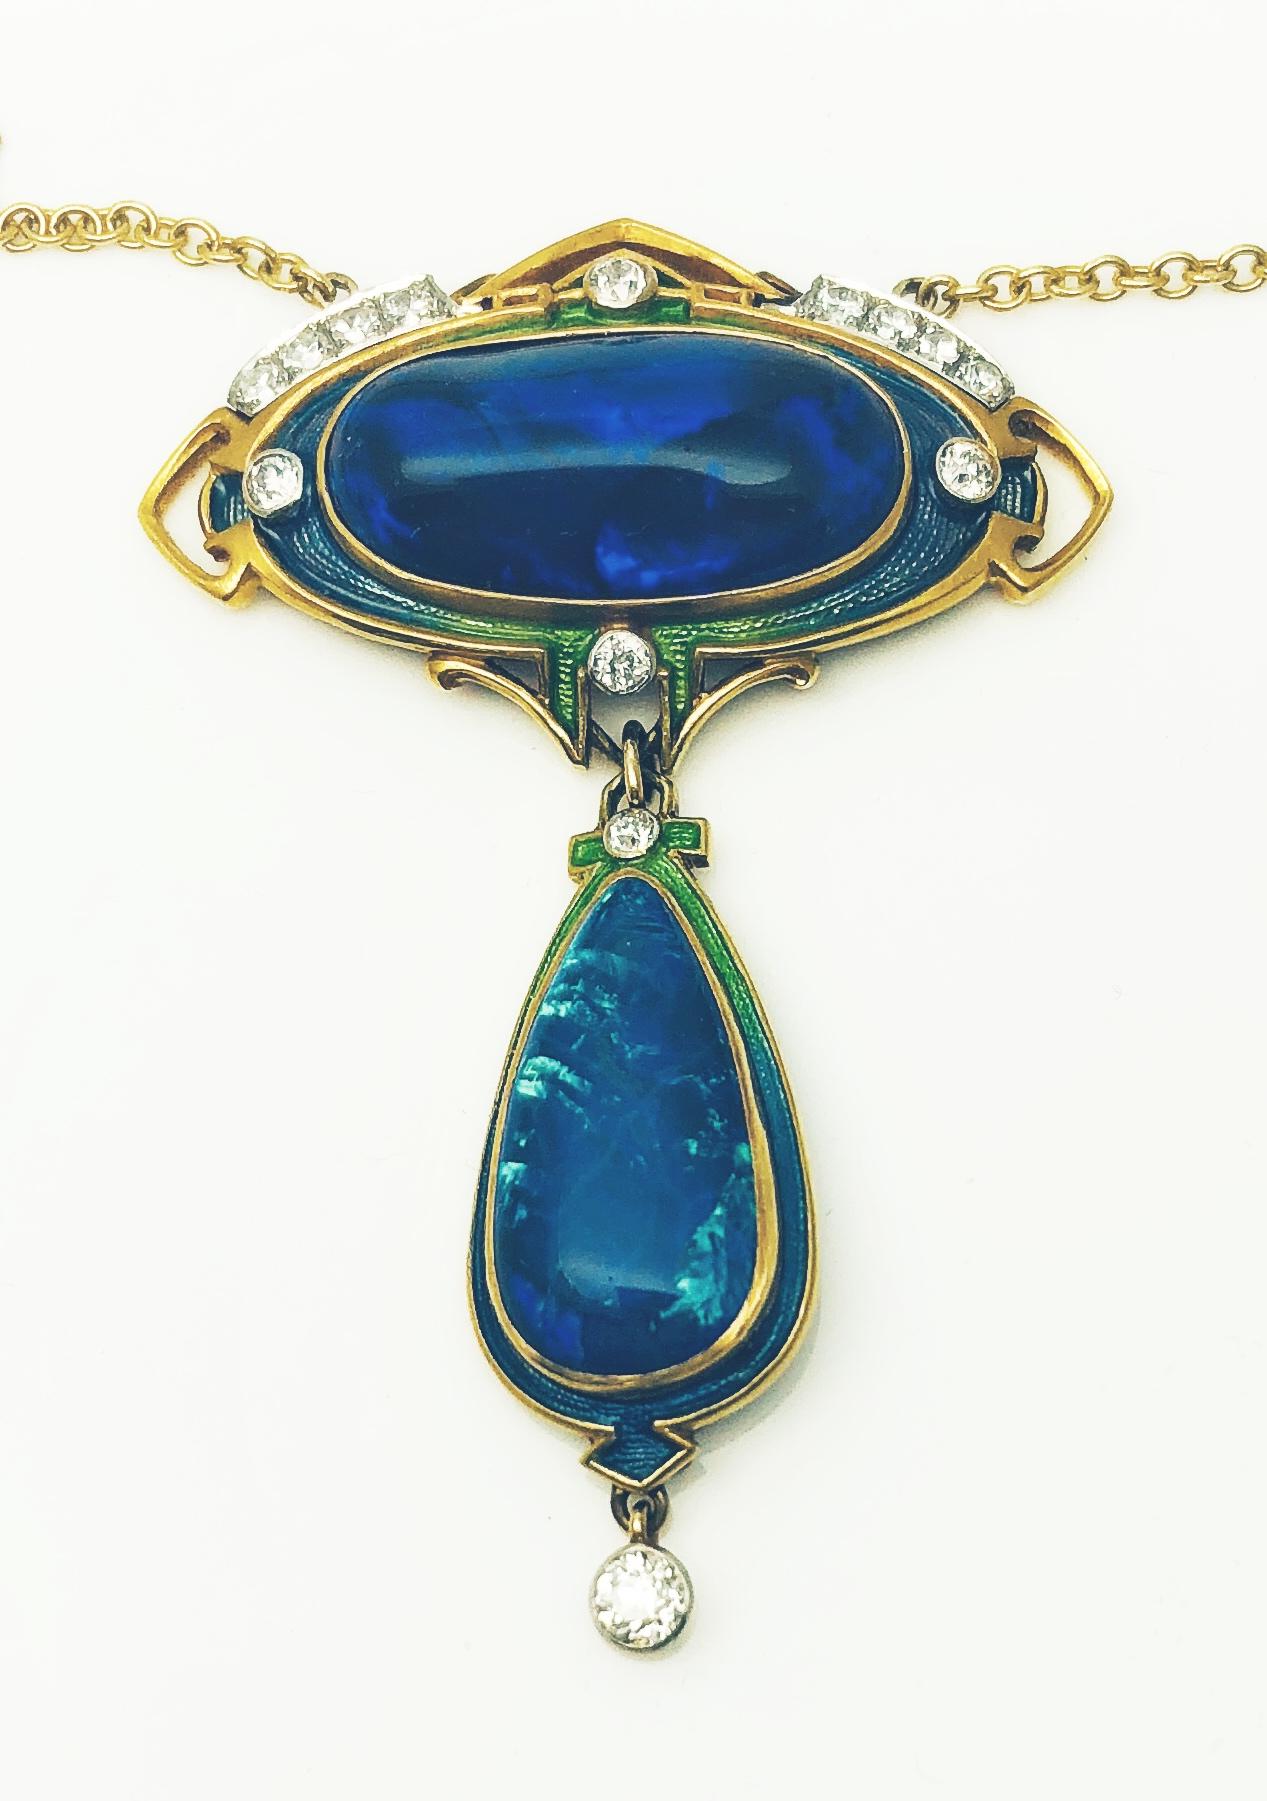 This is a Very Rare and absolutely stunning Durand and Company. Necklace! This Art Nouveau Necklace features a single, fine, oval, black opal that measures 23x12x5.8mm and weighs approximately 9 carats. The oval opal is set horizontally at the top